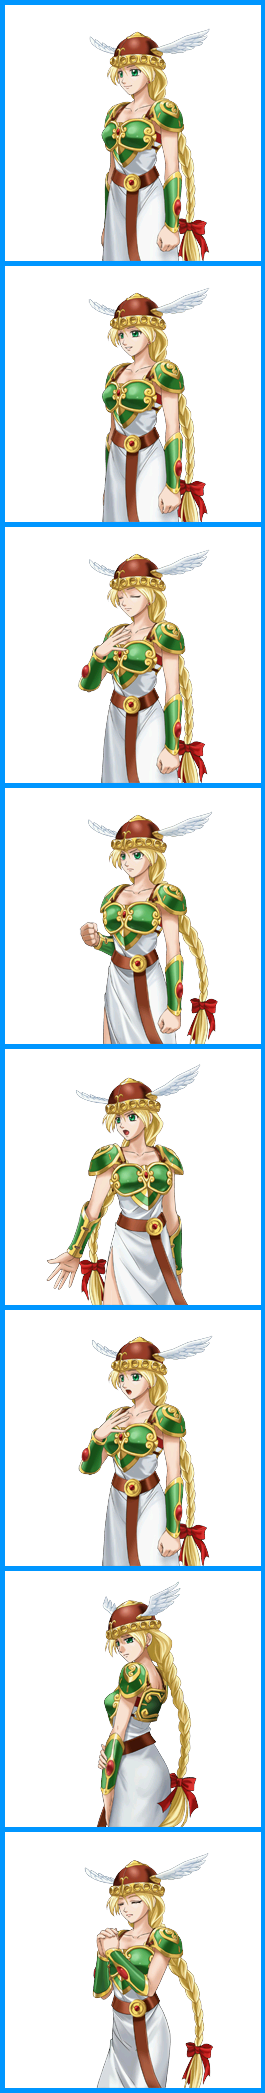 Project X Zone - Valkyrie